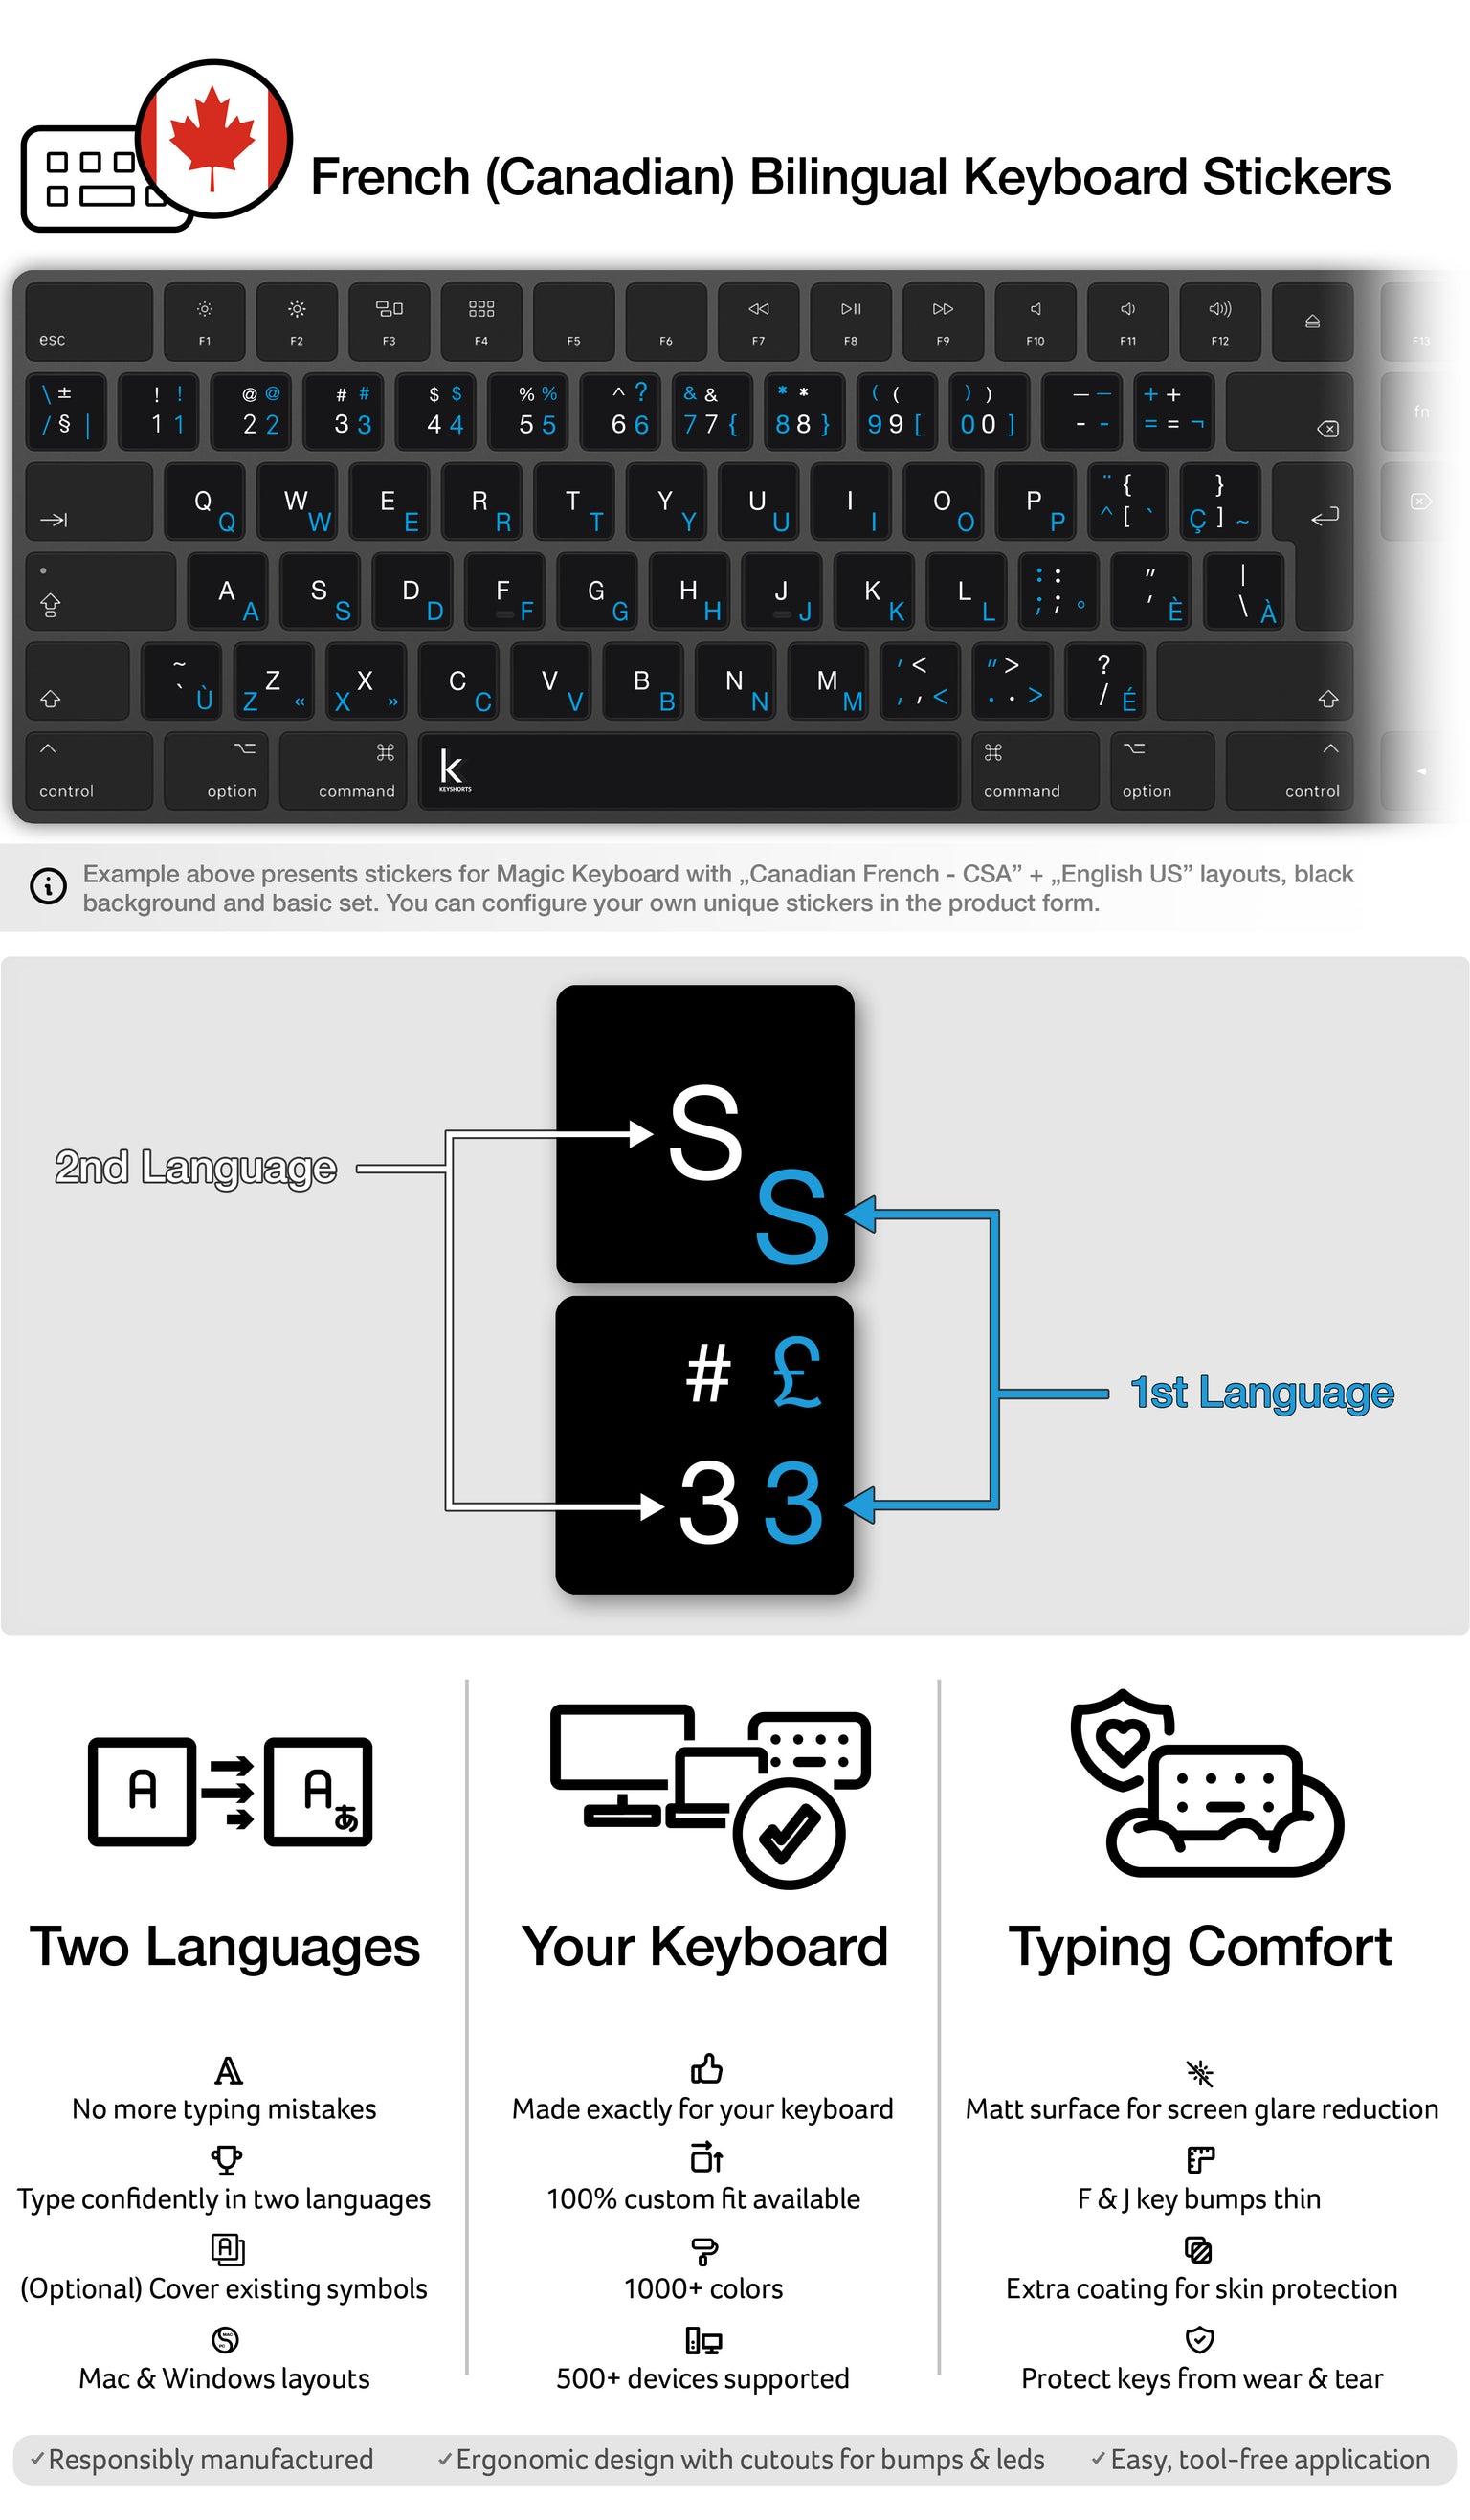 French (Canadian) Bilingual Keyboard Stickers